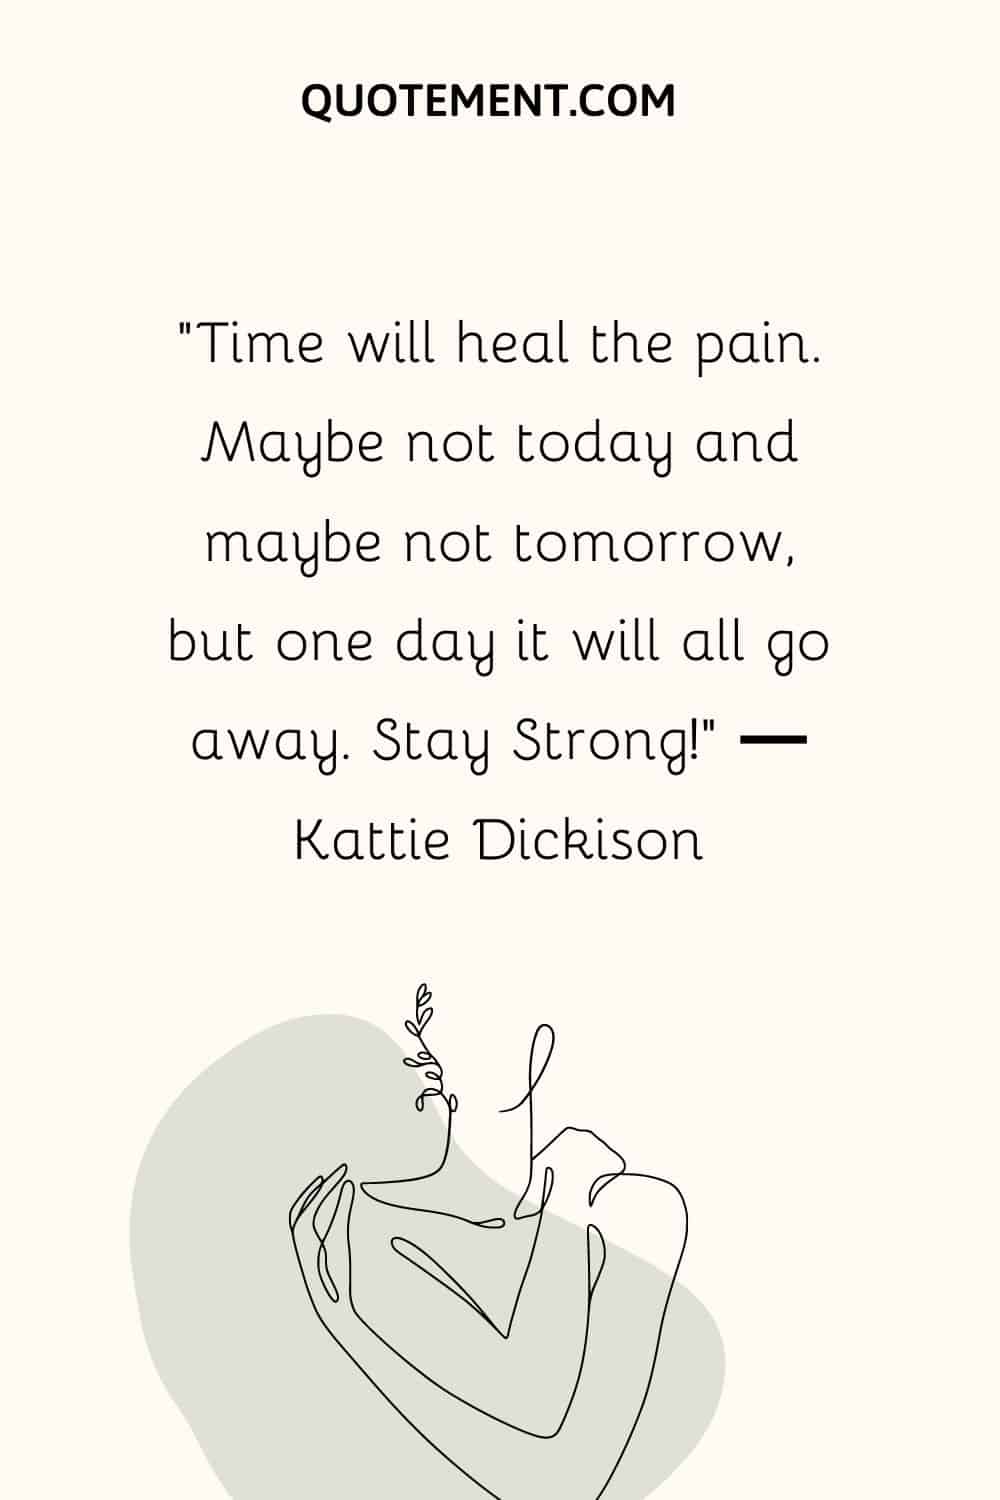 “Time will heal the pain. Maybe not today and maybe not tomorrow, but one day it will all go away. Stay Strong!” ― Kattie Dickison